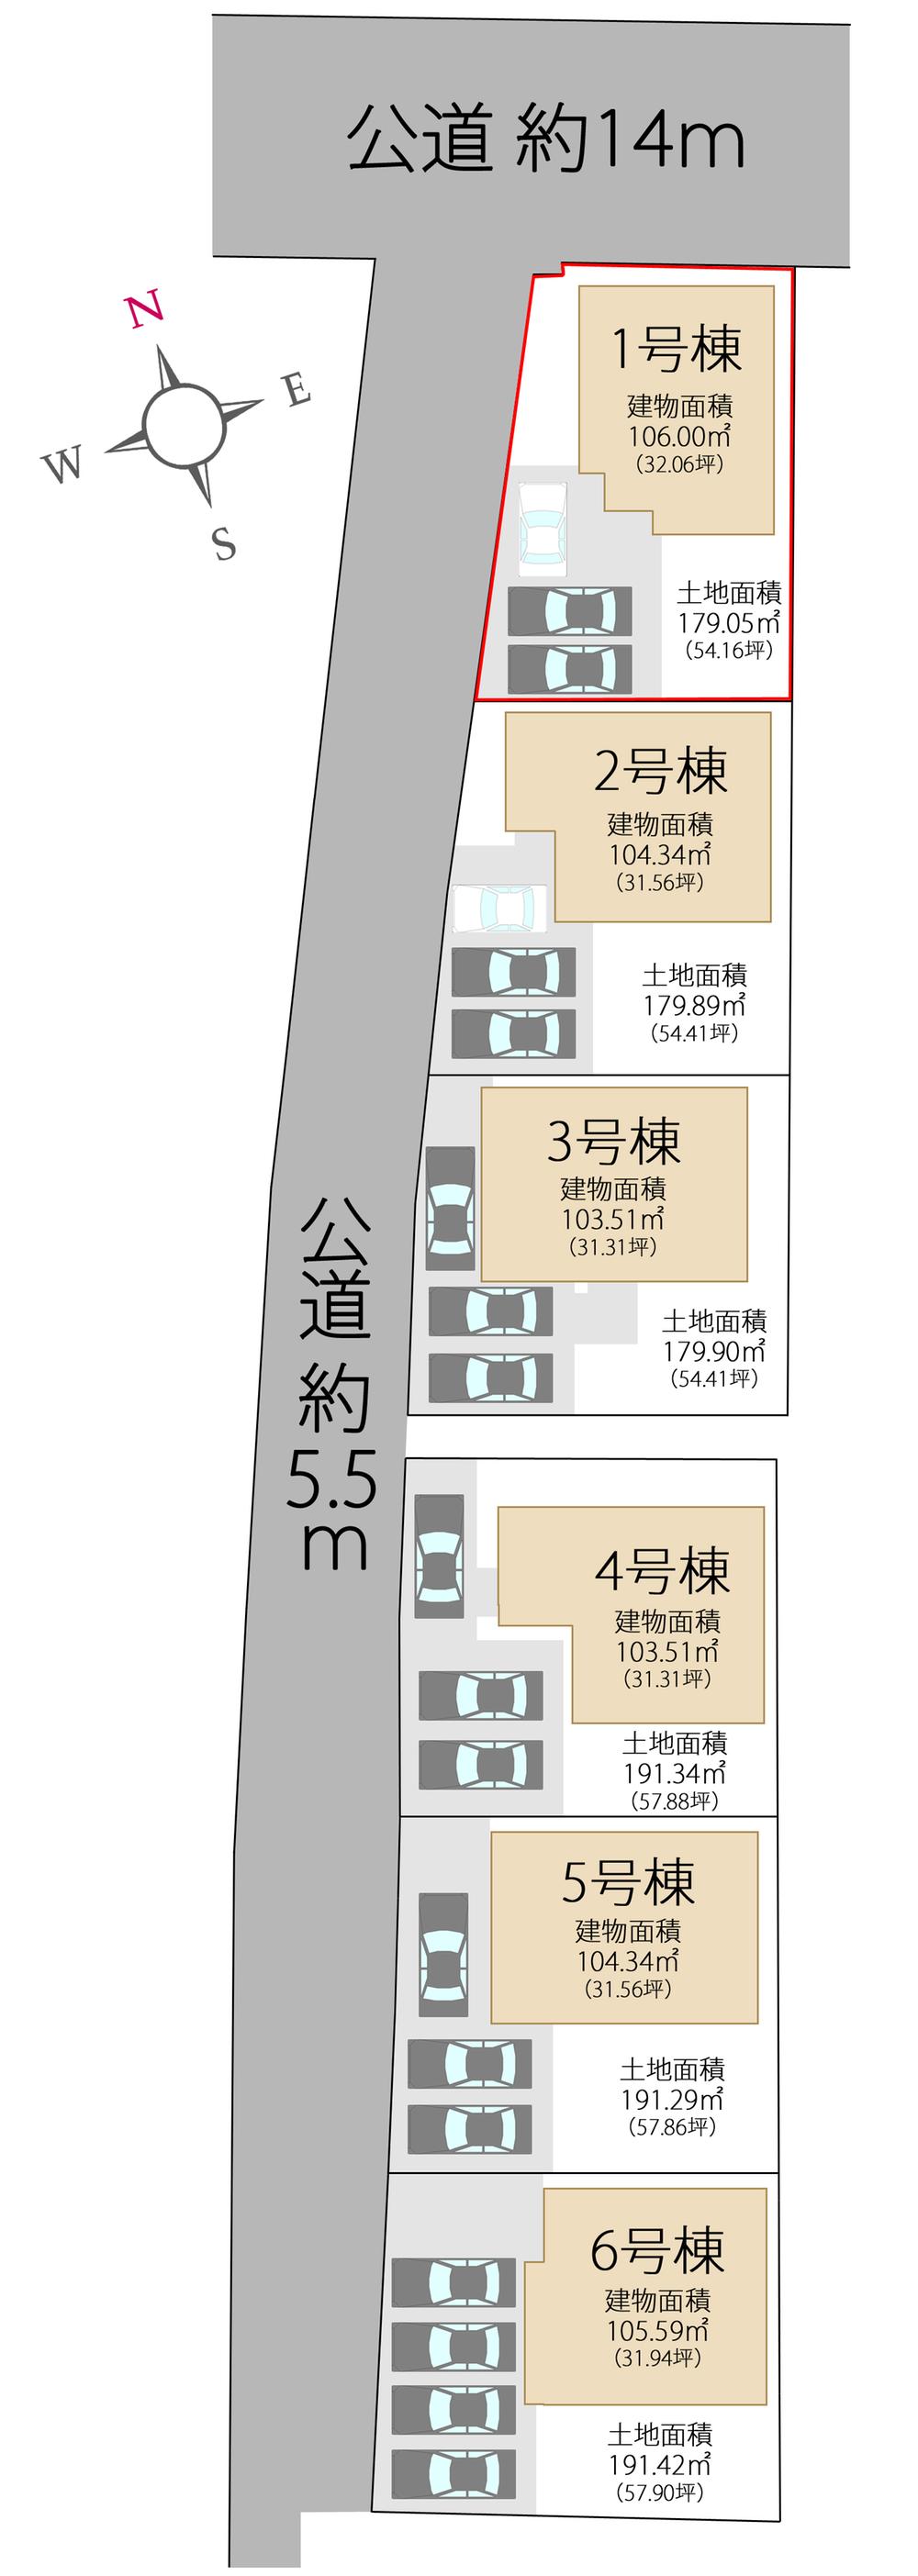 Compartment figure. 20.8 million yen, 4LDK, Land area 179.05 sq m , Building area 106 sq m parking parallel 2 car. Spacious front road, Parking in the back does not bother. 